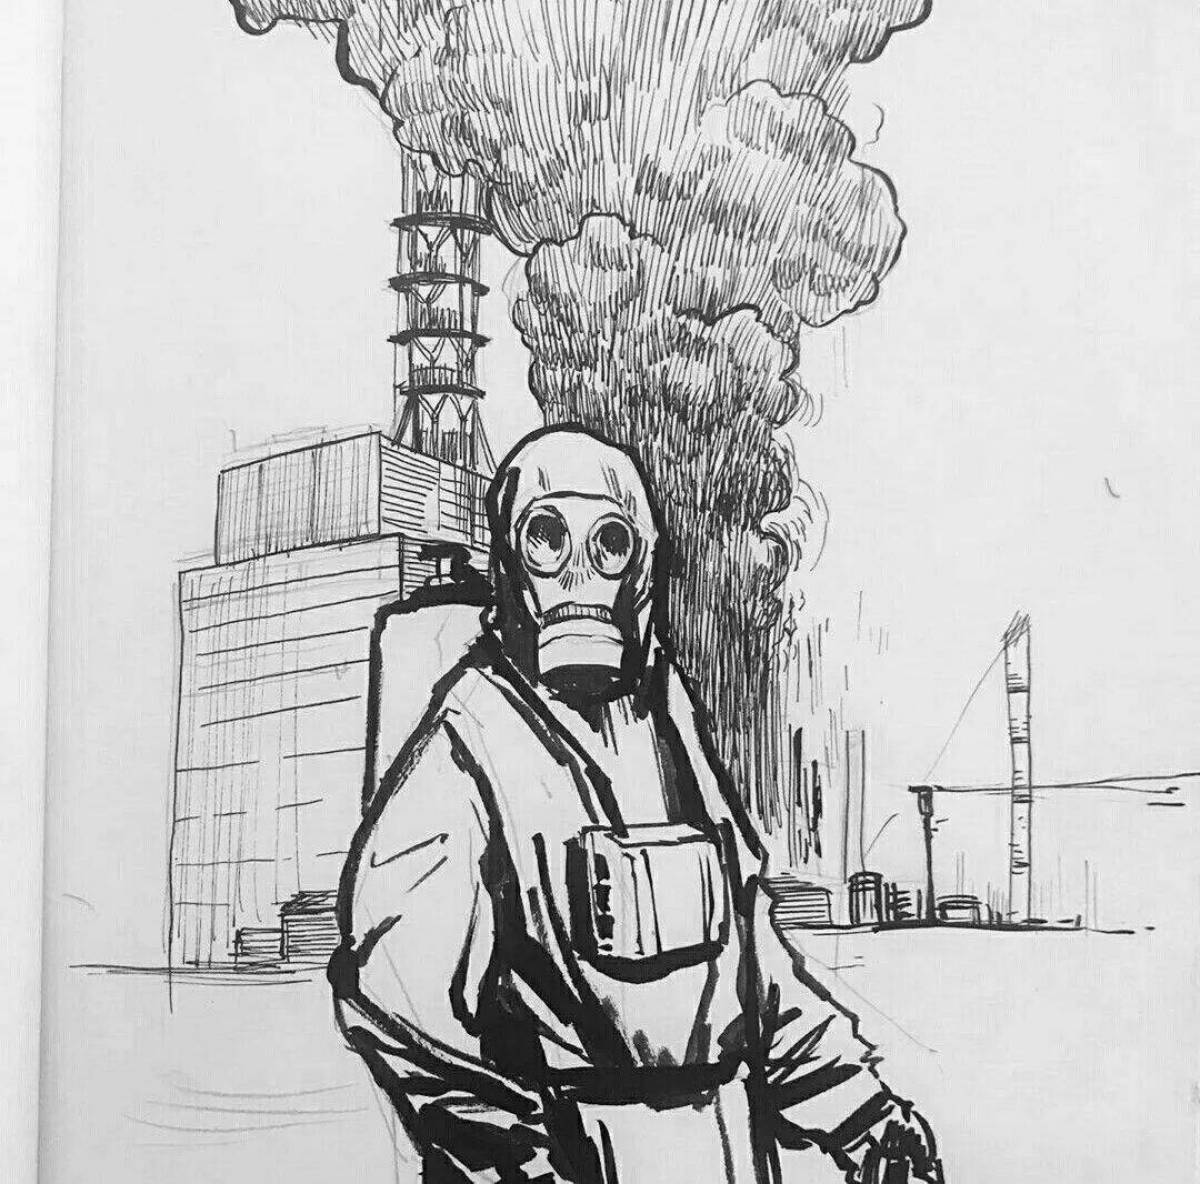 Suggestive Chernobyl coloring book